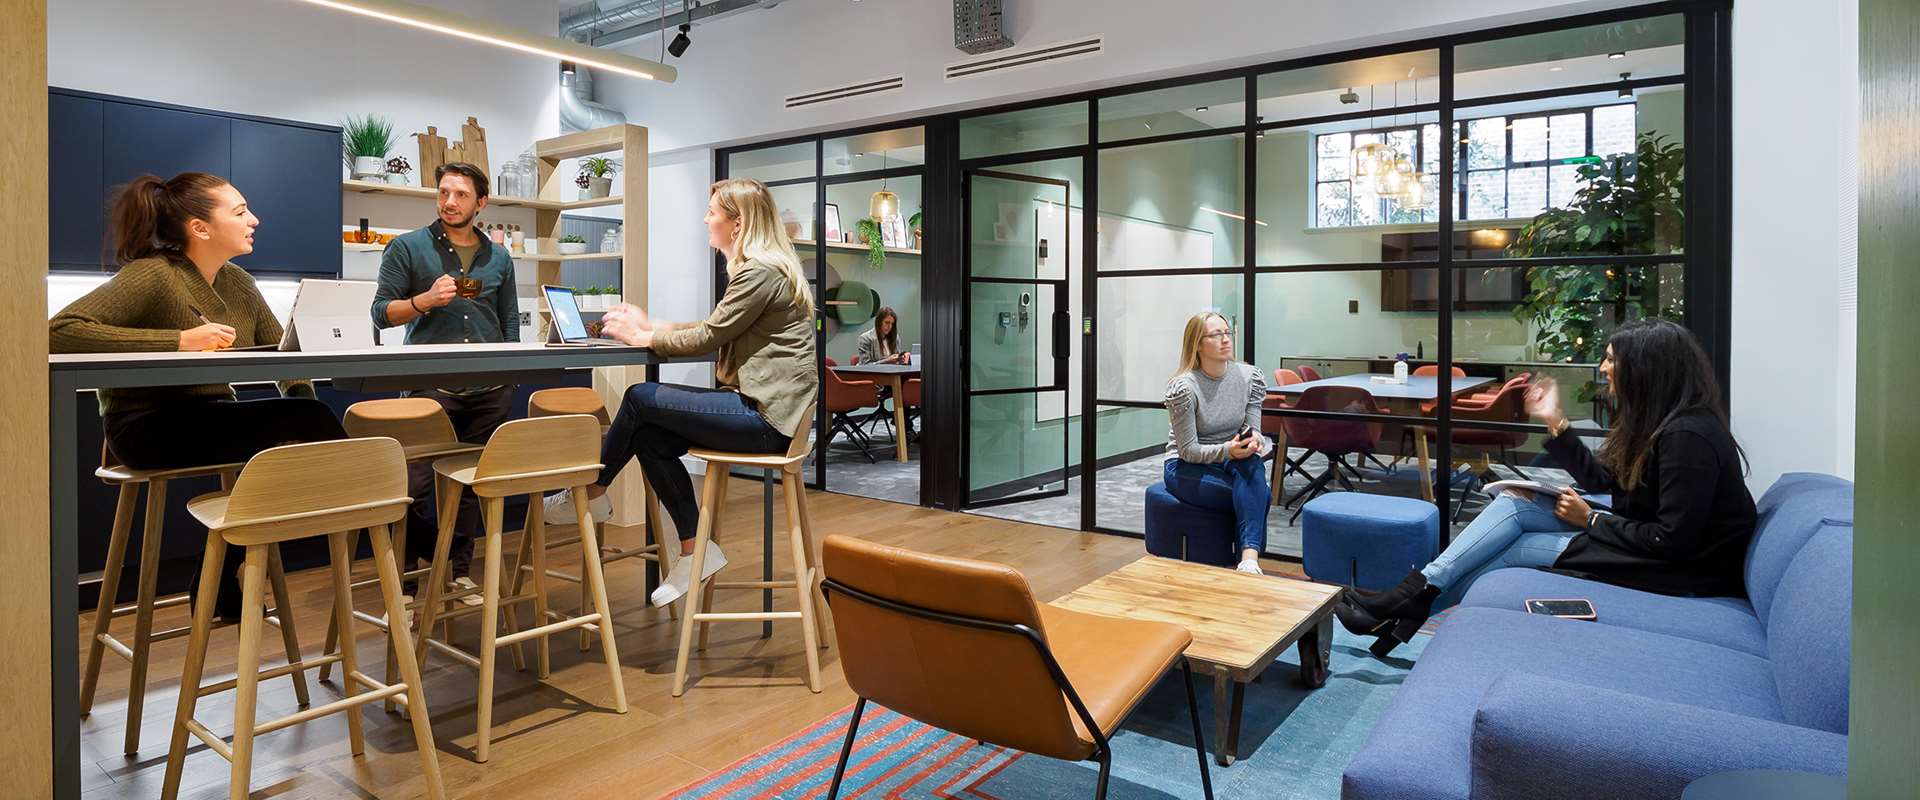 Short-term office space | Workspace ®